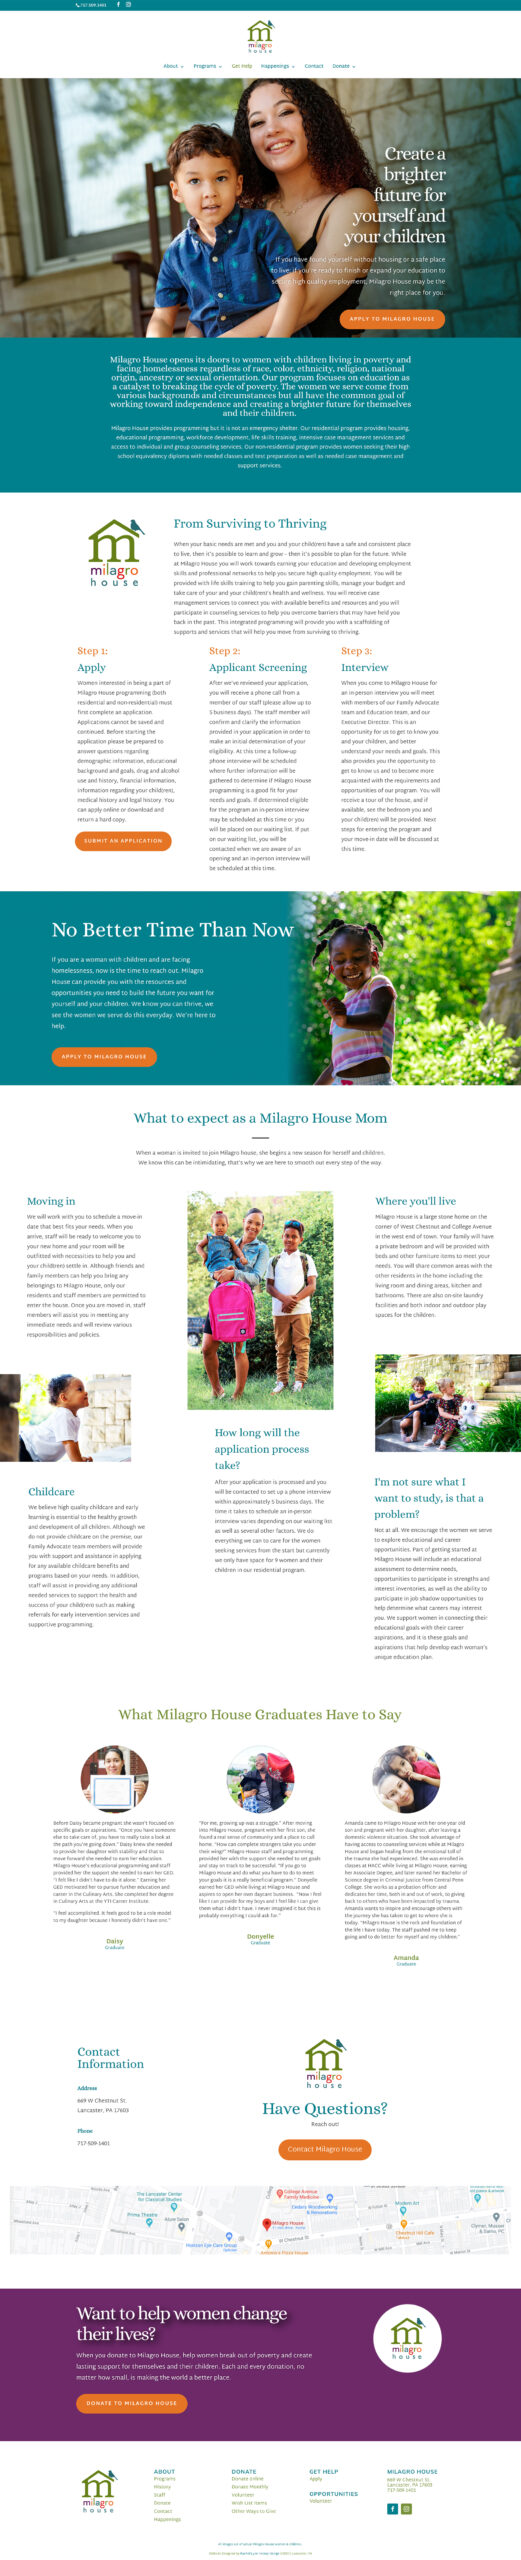 Milagro House Lancaster, PA Nonprofit Website Redesigned by Lancaster, PA Graphic Designer & Web Designer Rachel Lynn Heisey Website Redesign